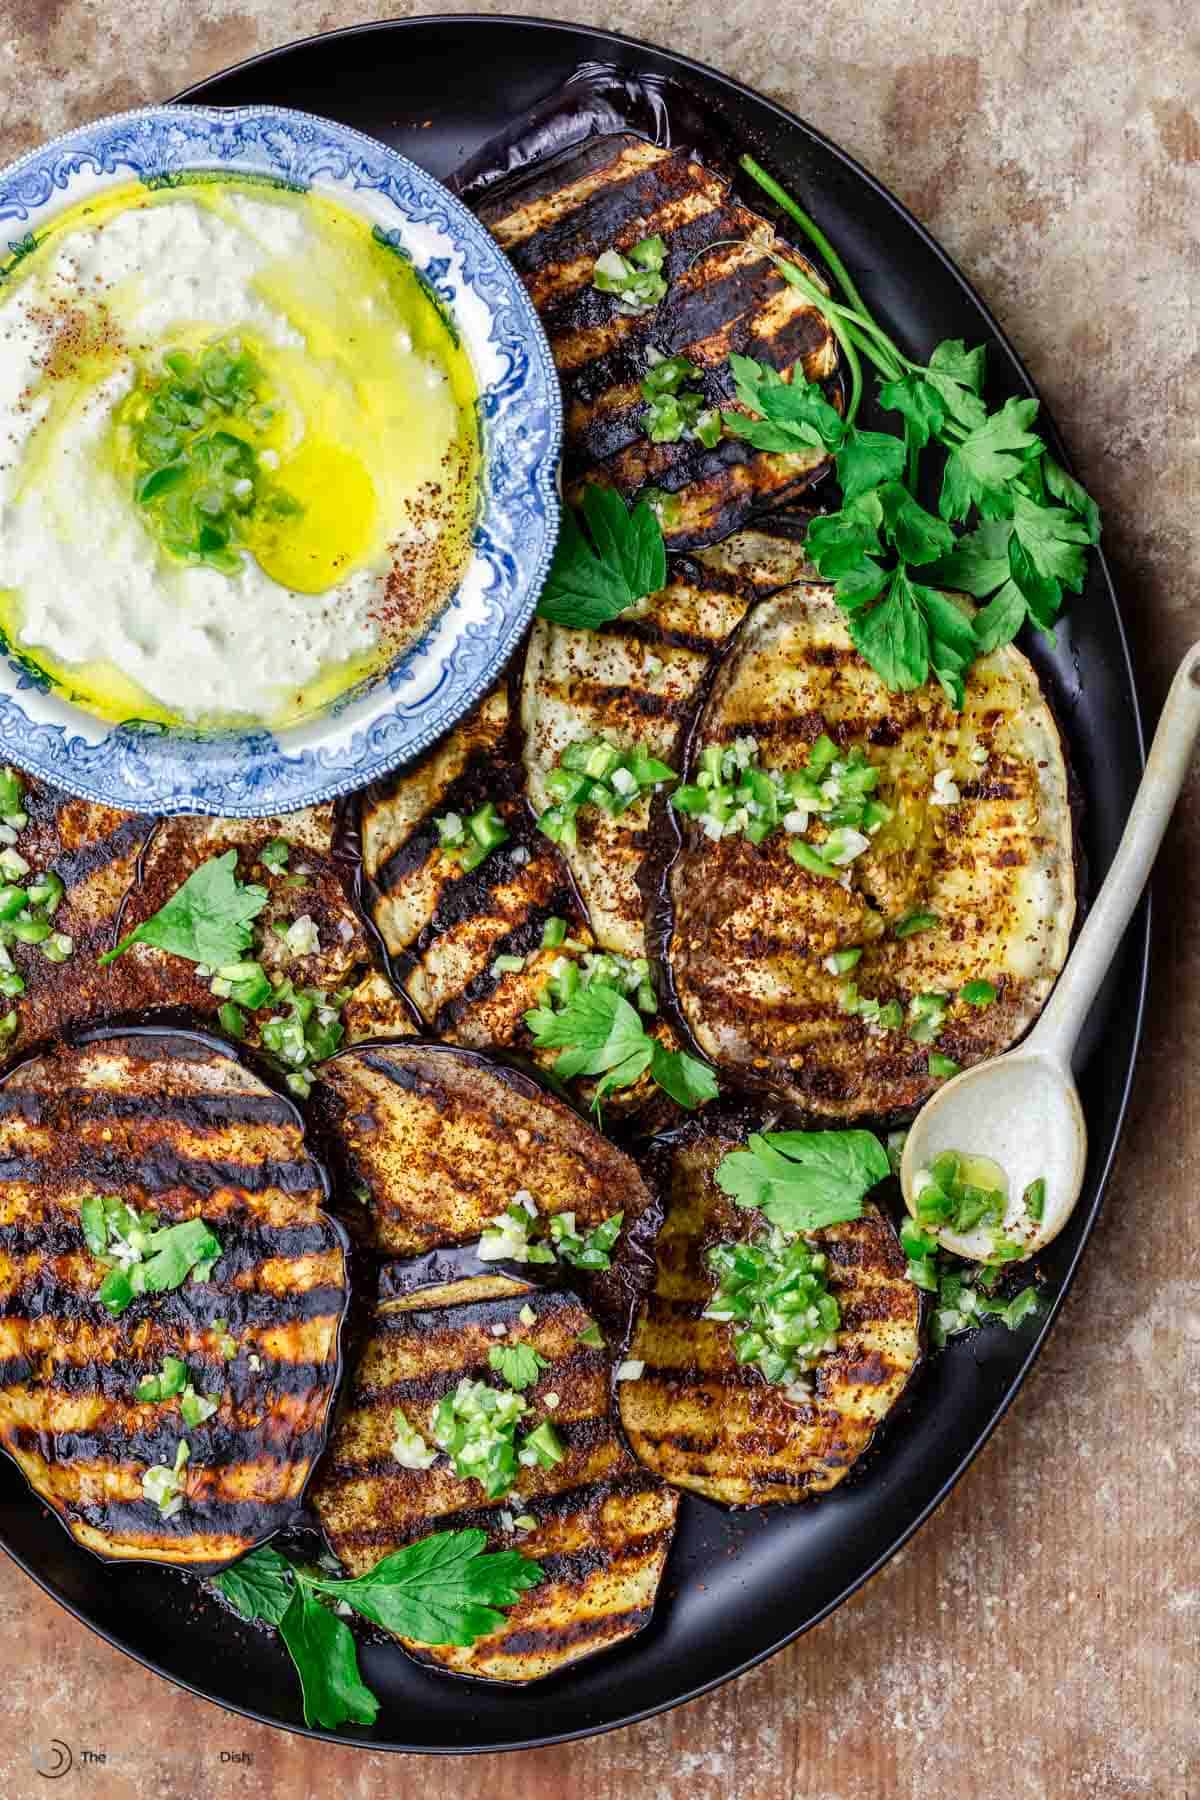 II. Choosing the right eggplant for grilling